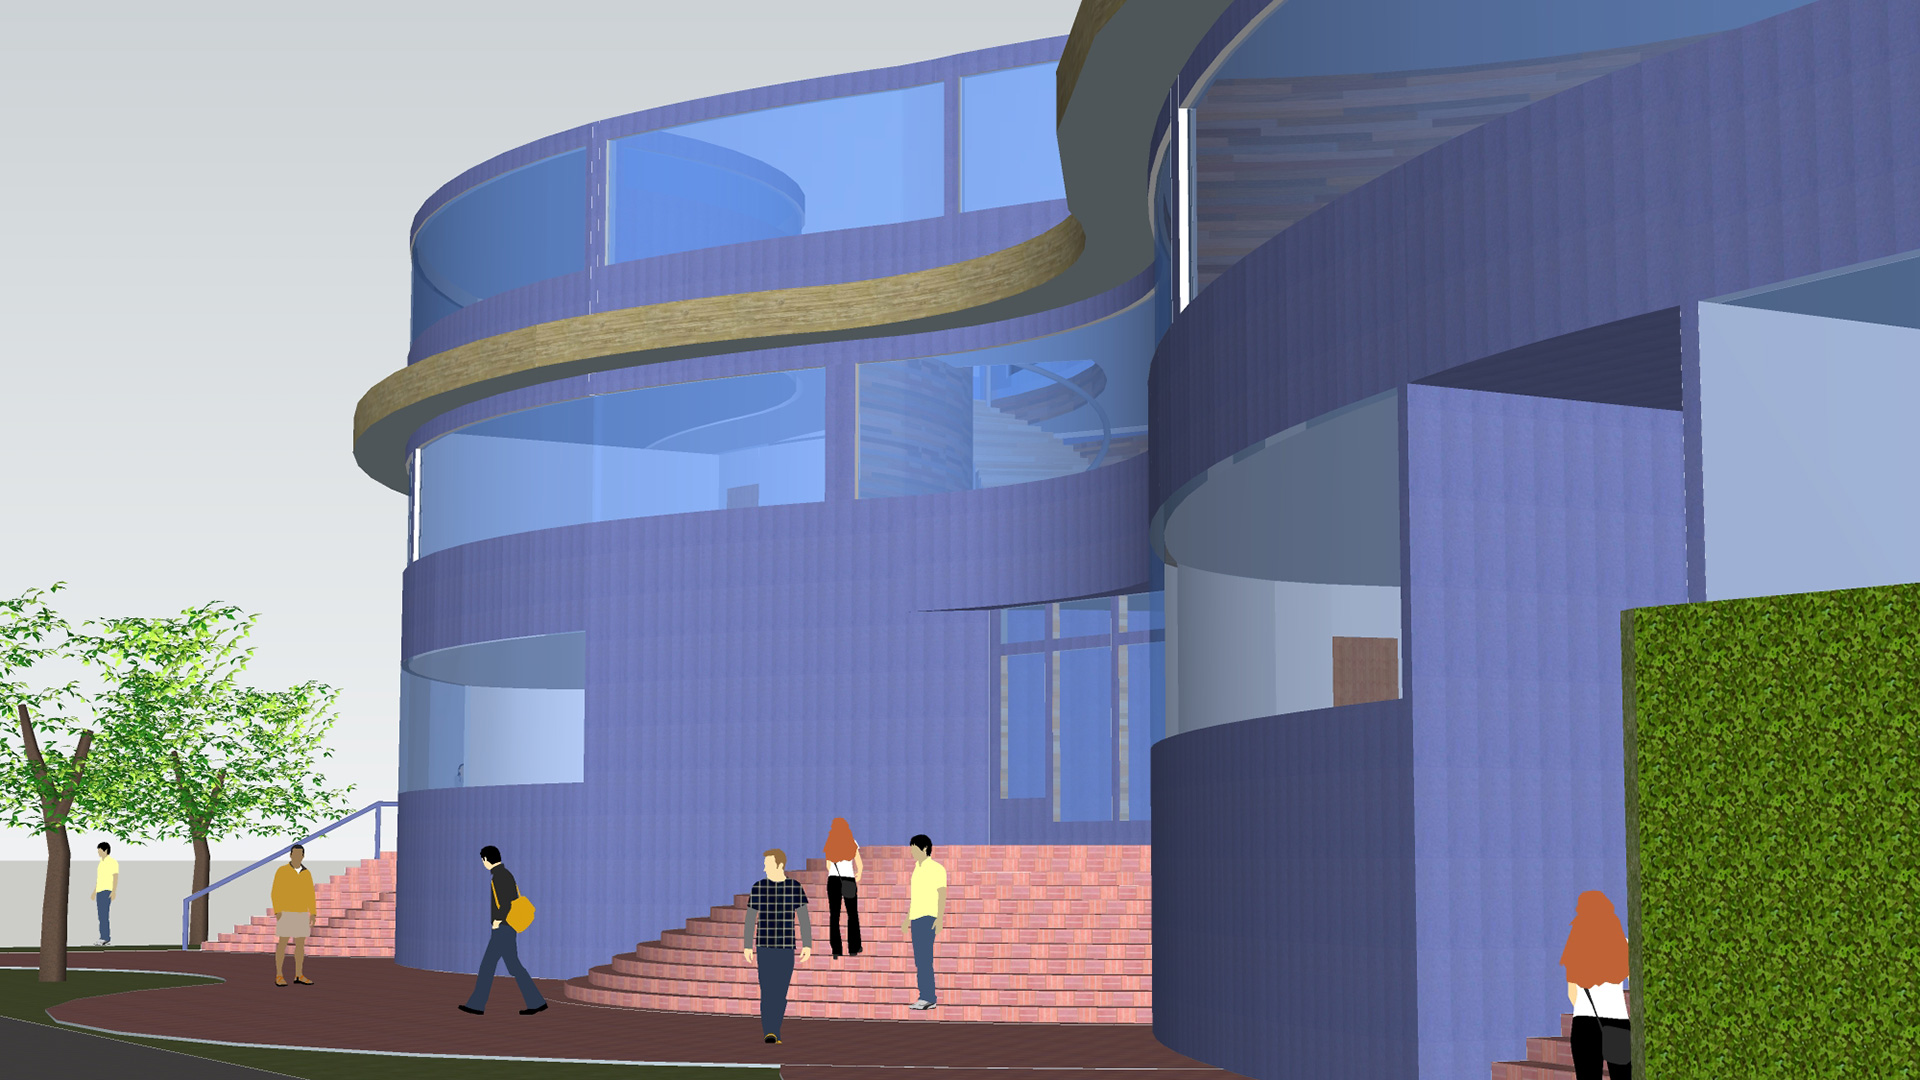 Conceptual render of campus, with curving blue walls and brick stairway leading to entrance.